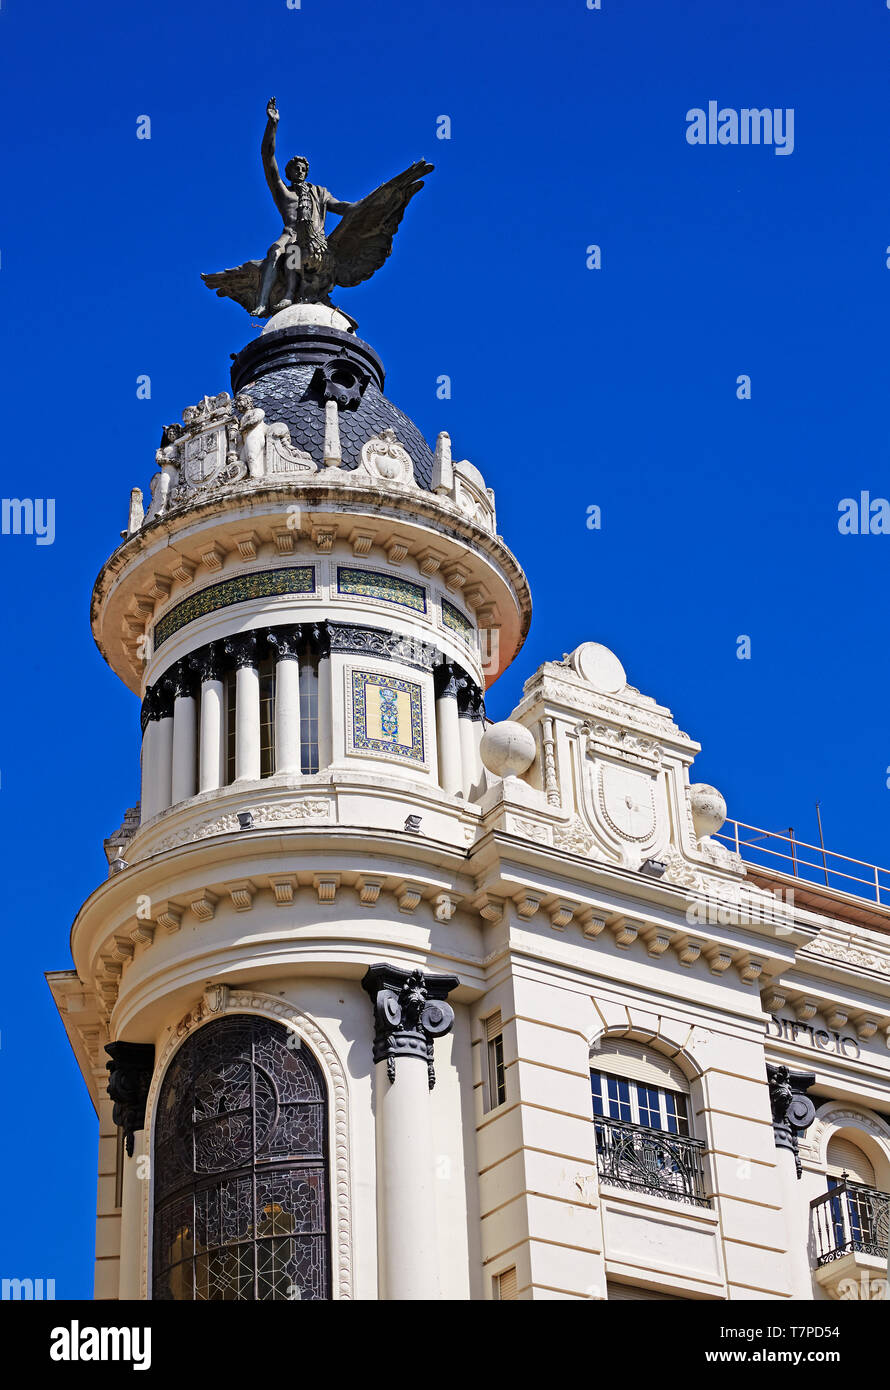 Architectural detail of the 'Union and the Phoenix' building in the central 'Plaza de las Tendillas' against blue skies Stock Photo